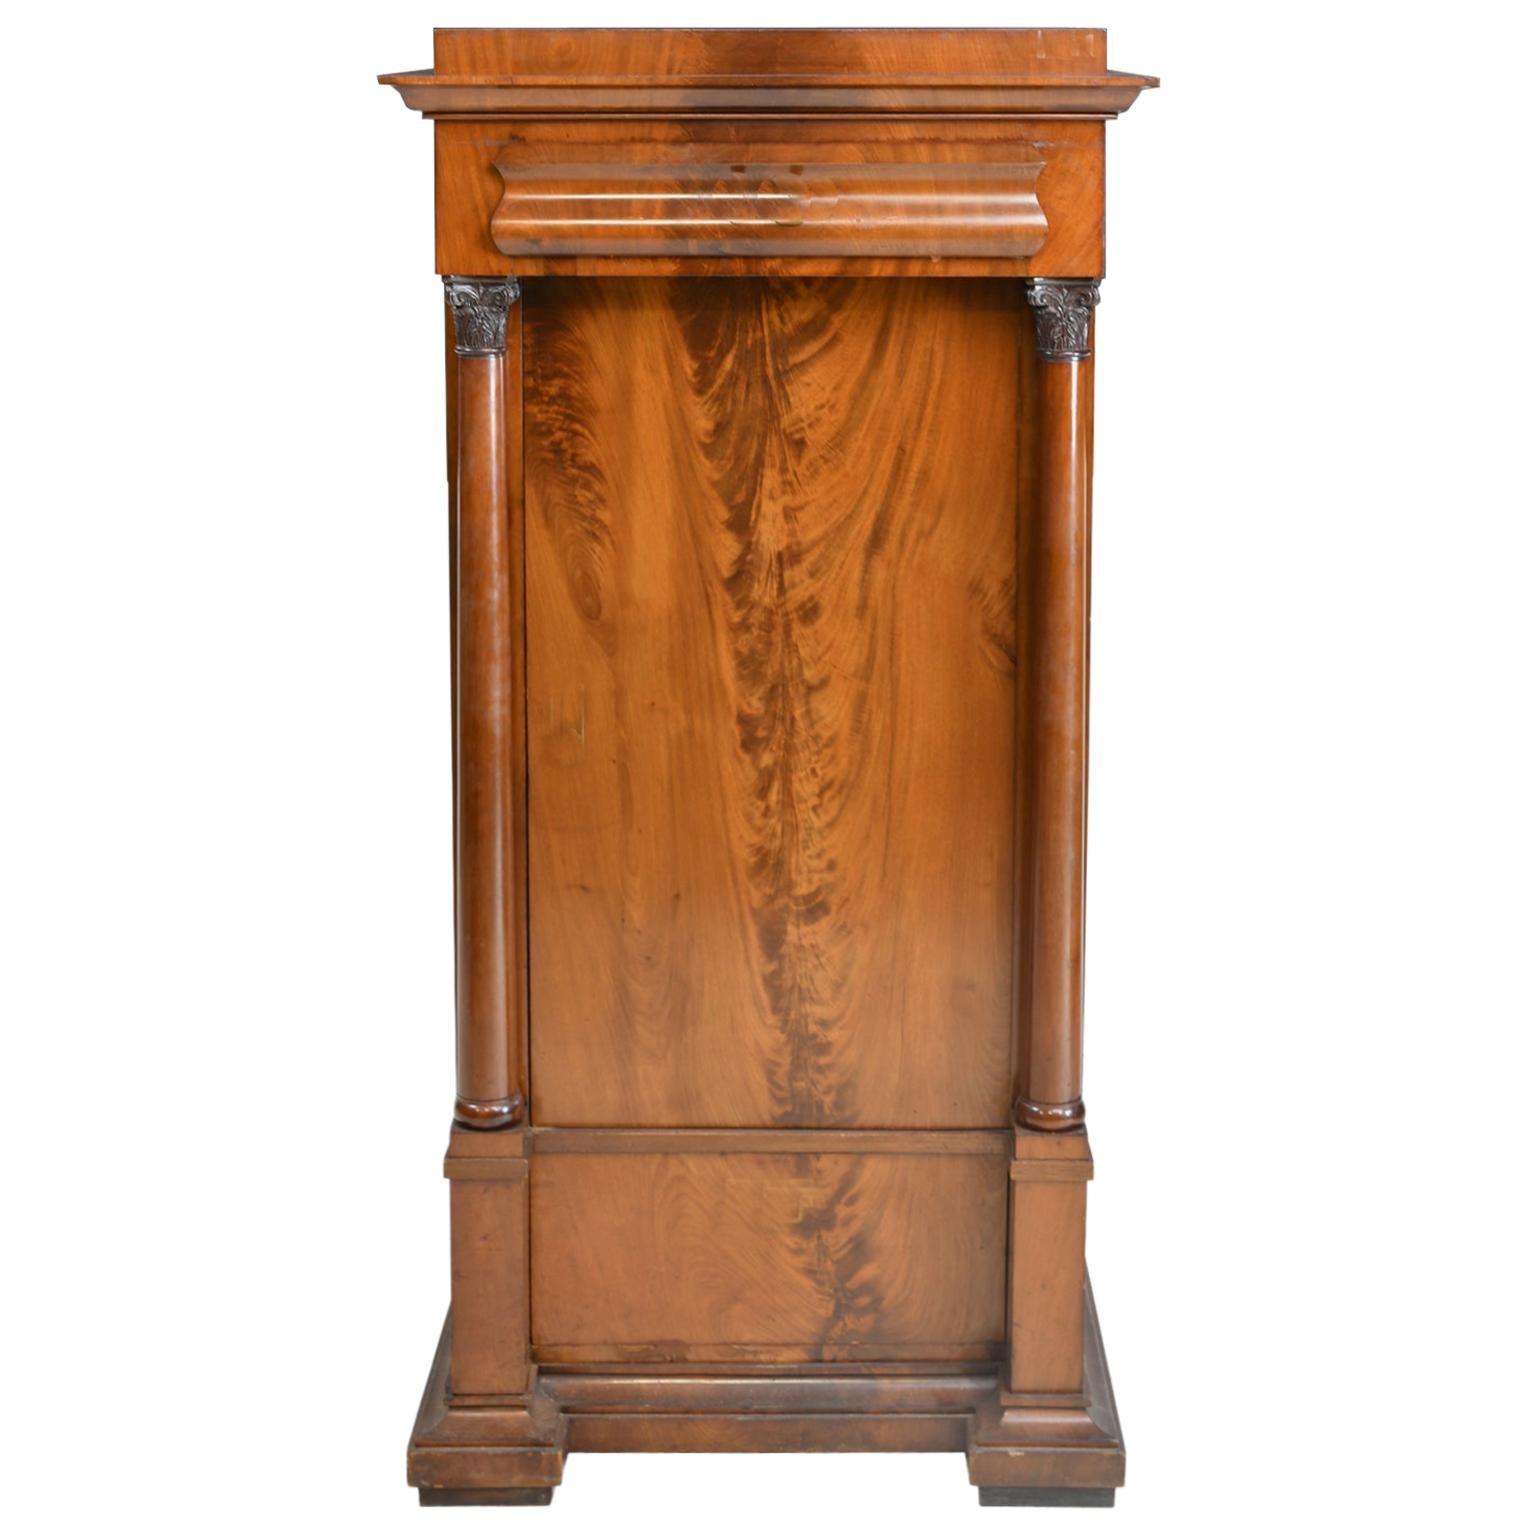 Beautiful example of a Danish Christian VIII pedestal cabinet from the Biedermeier period in figured mahogany with fully turned veneered columns and carved capitals all in West Indies mahogany, circa 1830. All original with flat door a single